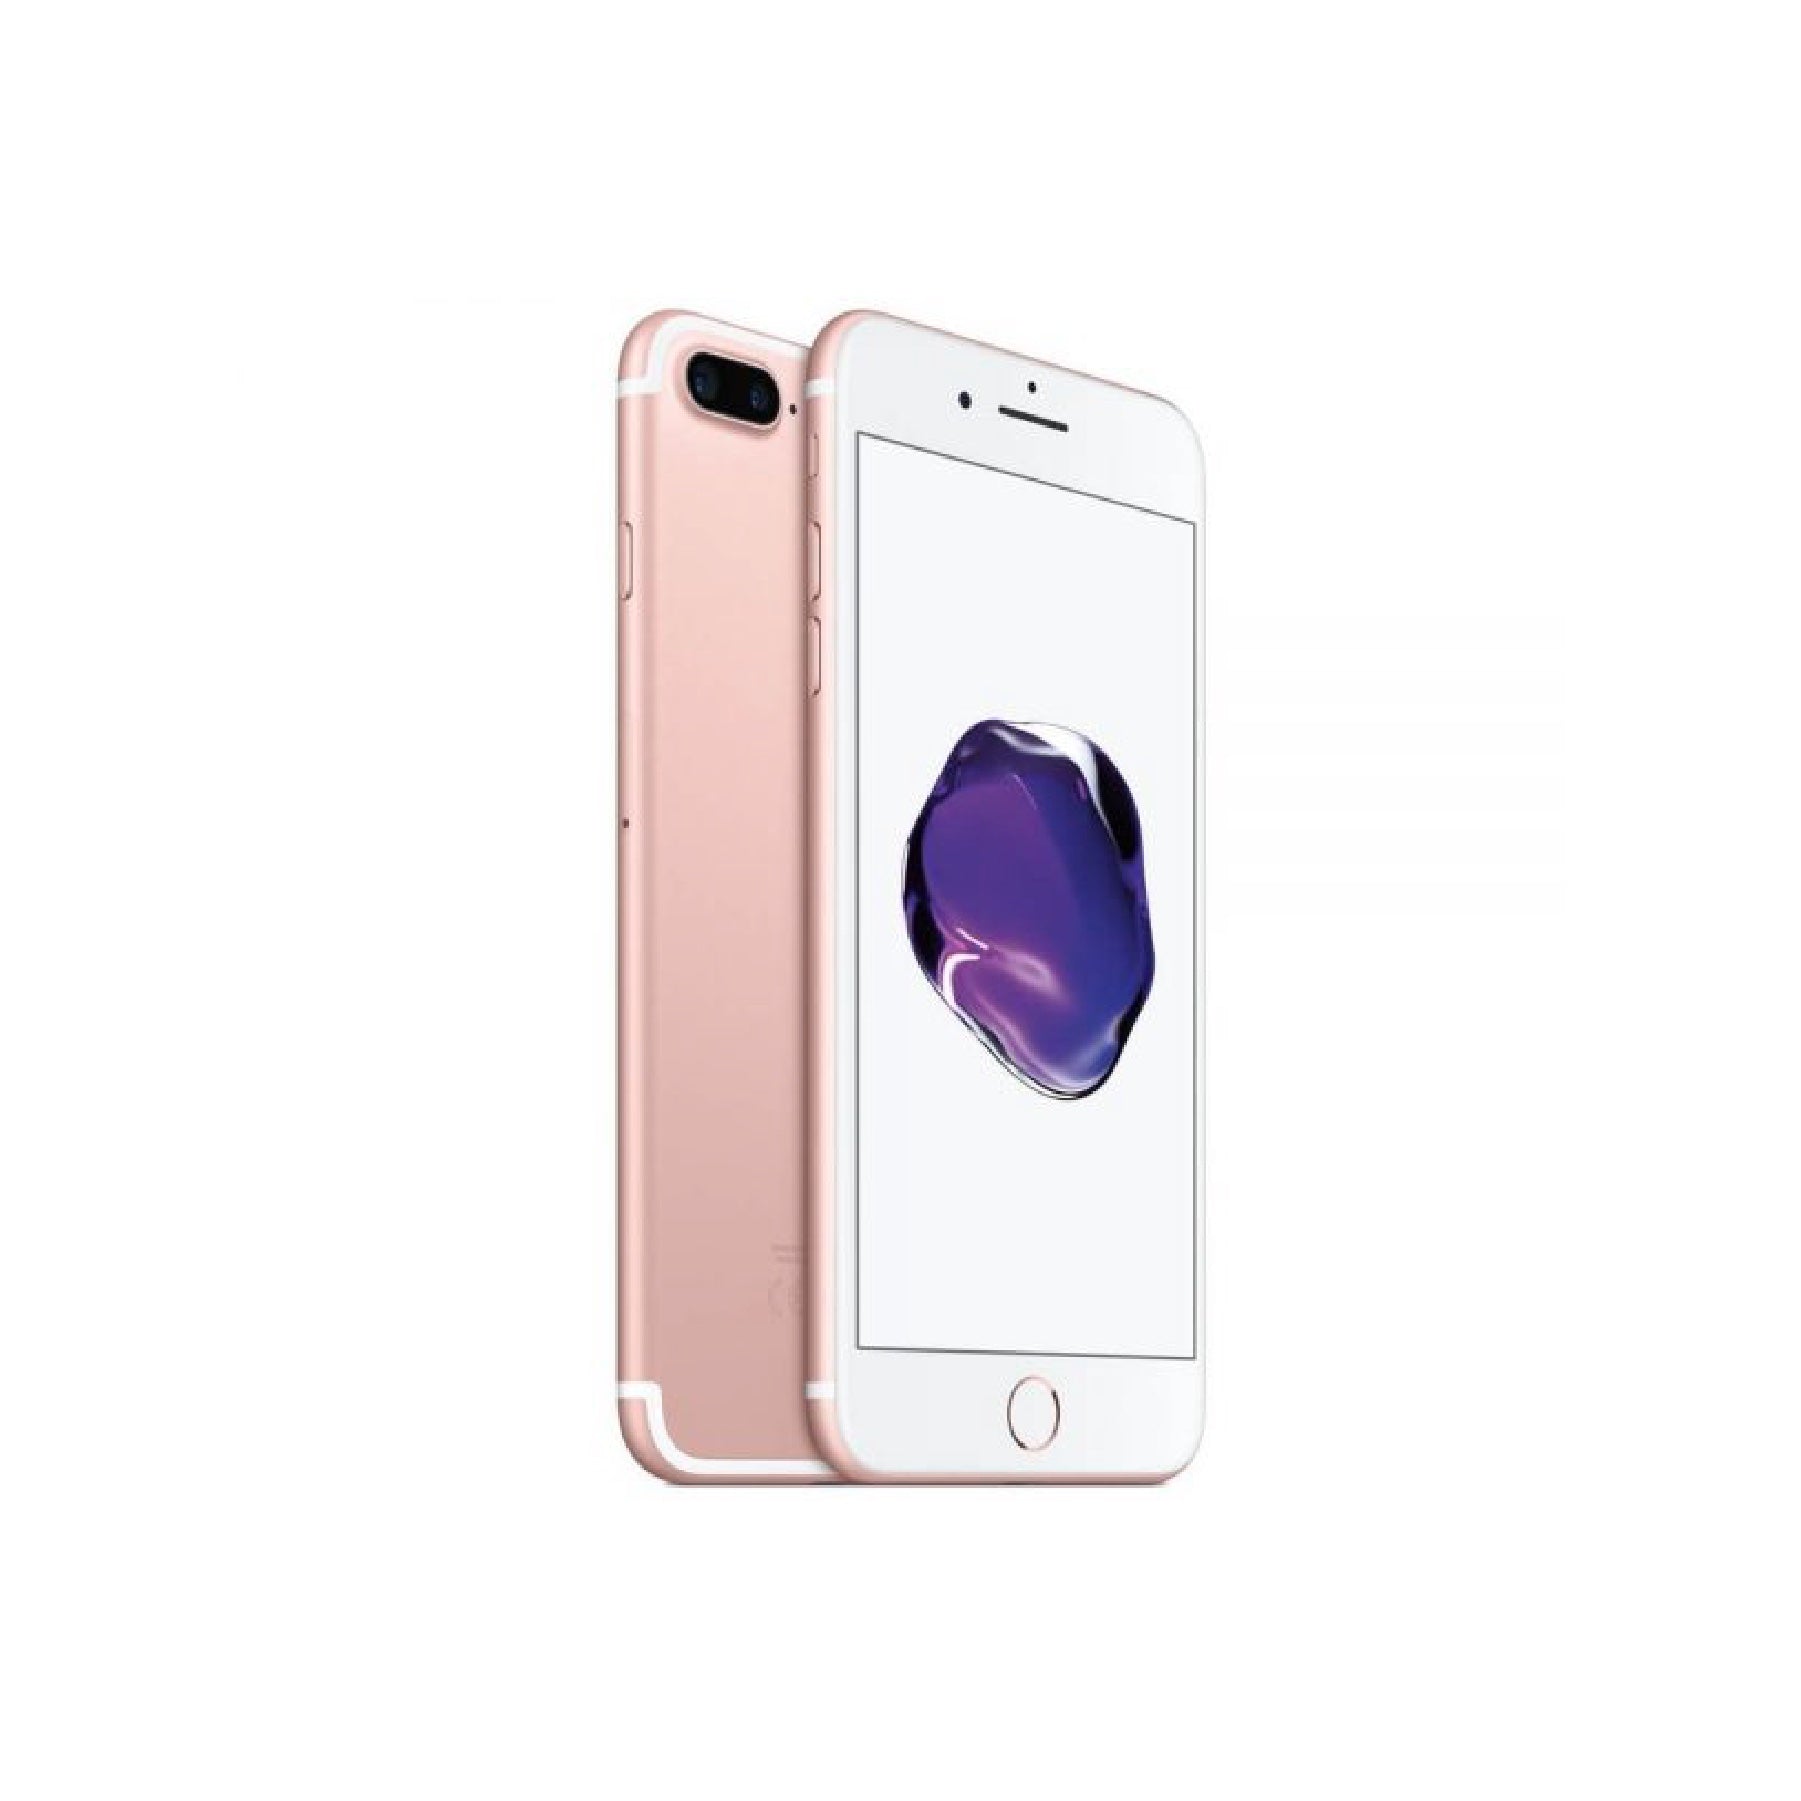 iPhone 7 Plus 32GB - Rose Gold (Better) - iStore Pre-owned